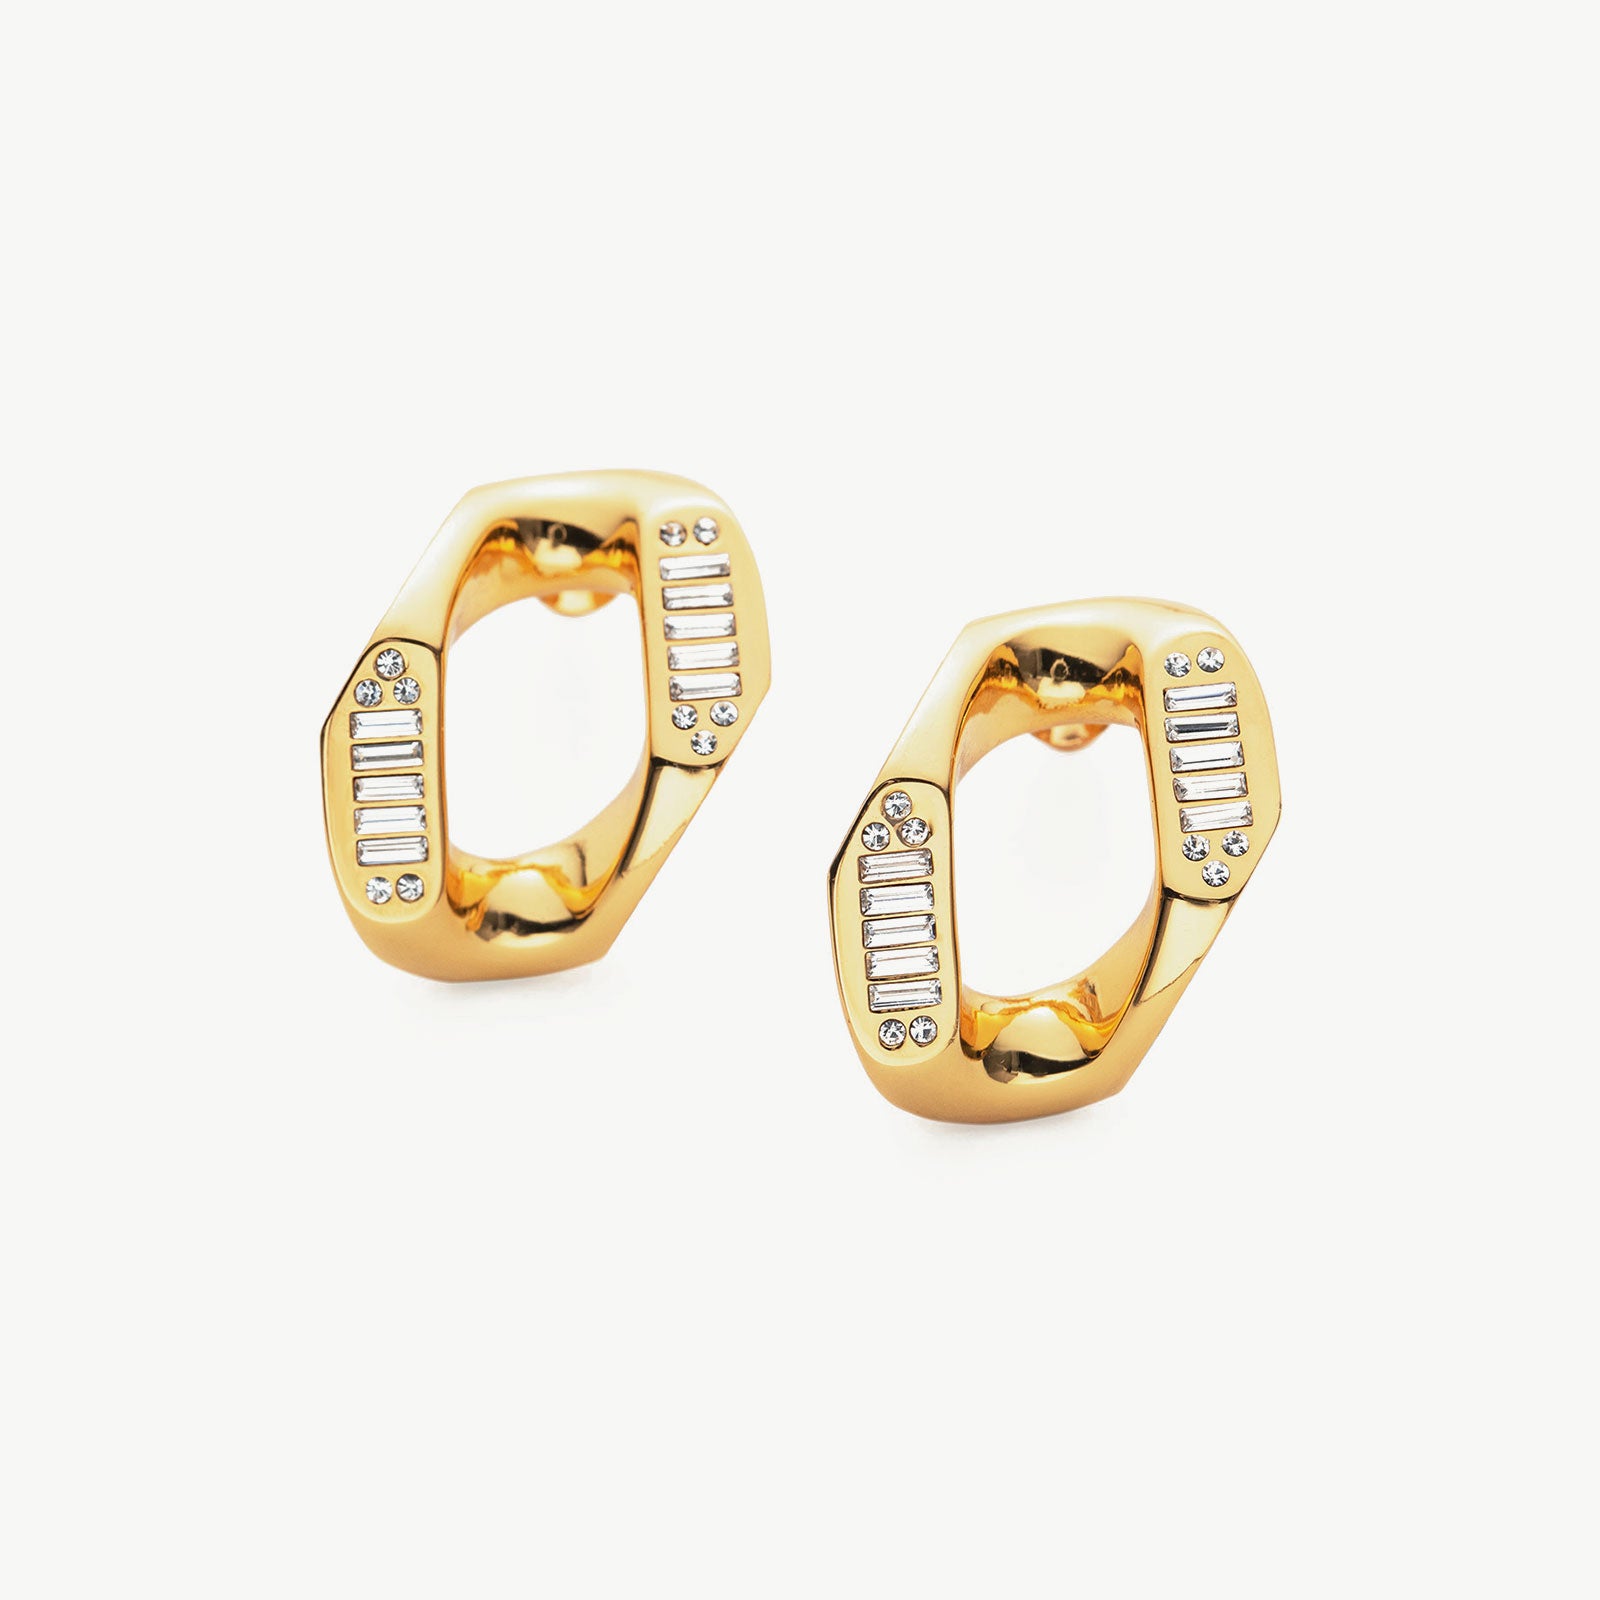 Crystal-adorned Wavy Stud Earrings in gold, a chic and sophisticated choice that complements your style with radiant shimmer